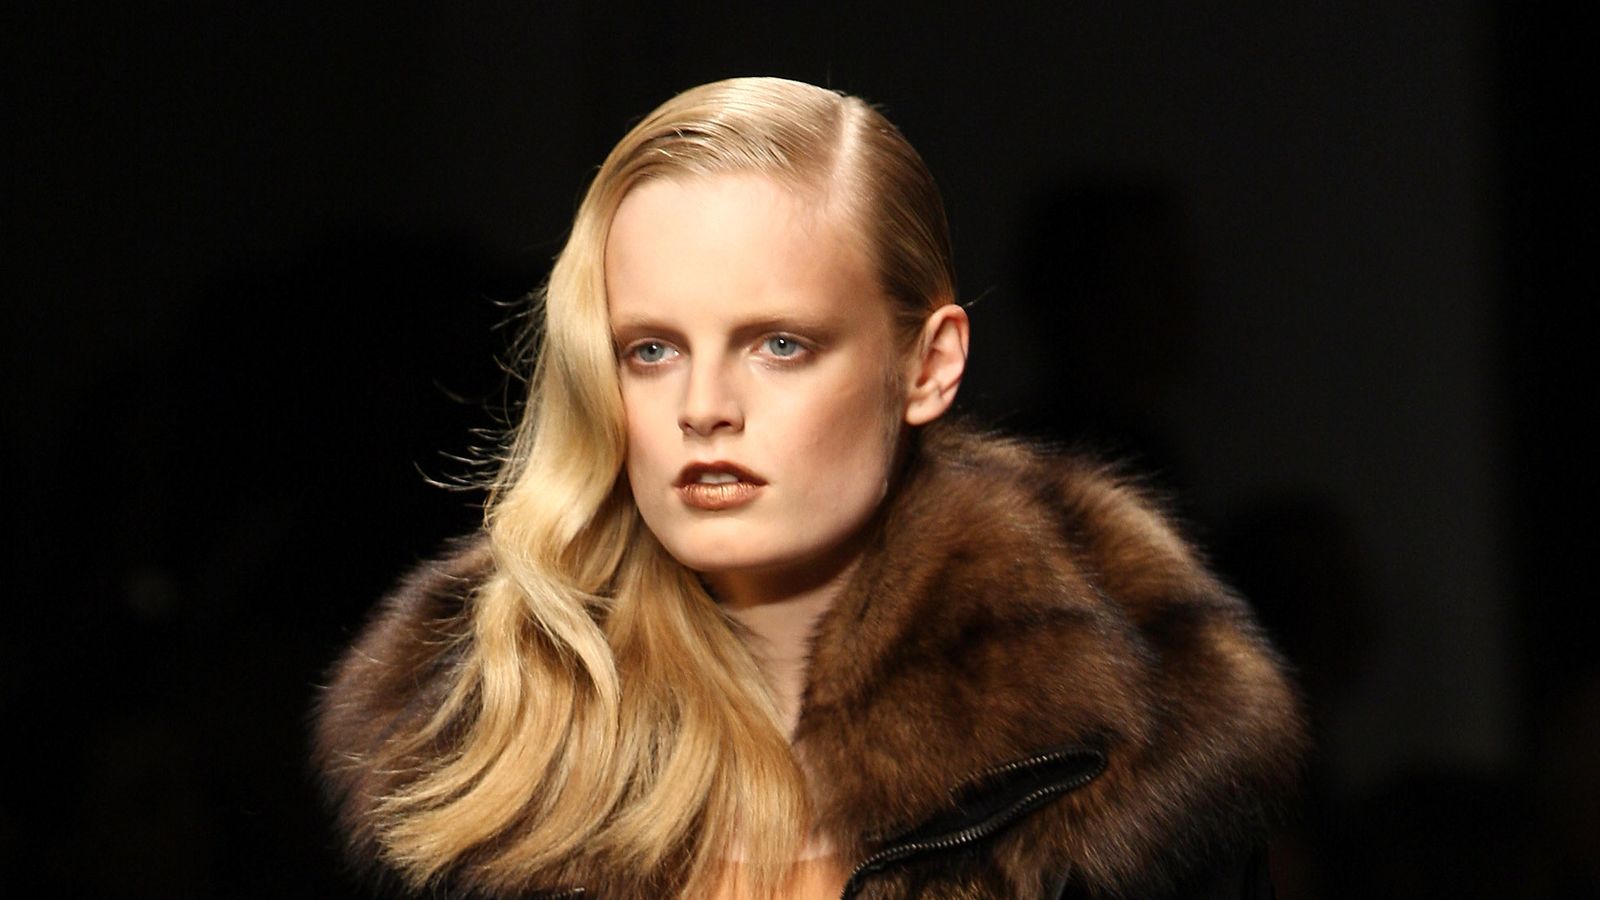 Model Hanne Gaby Odiele speaks about what it means to be intersex